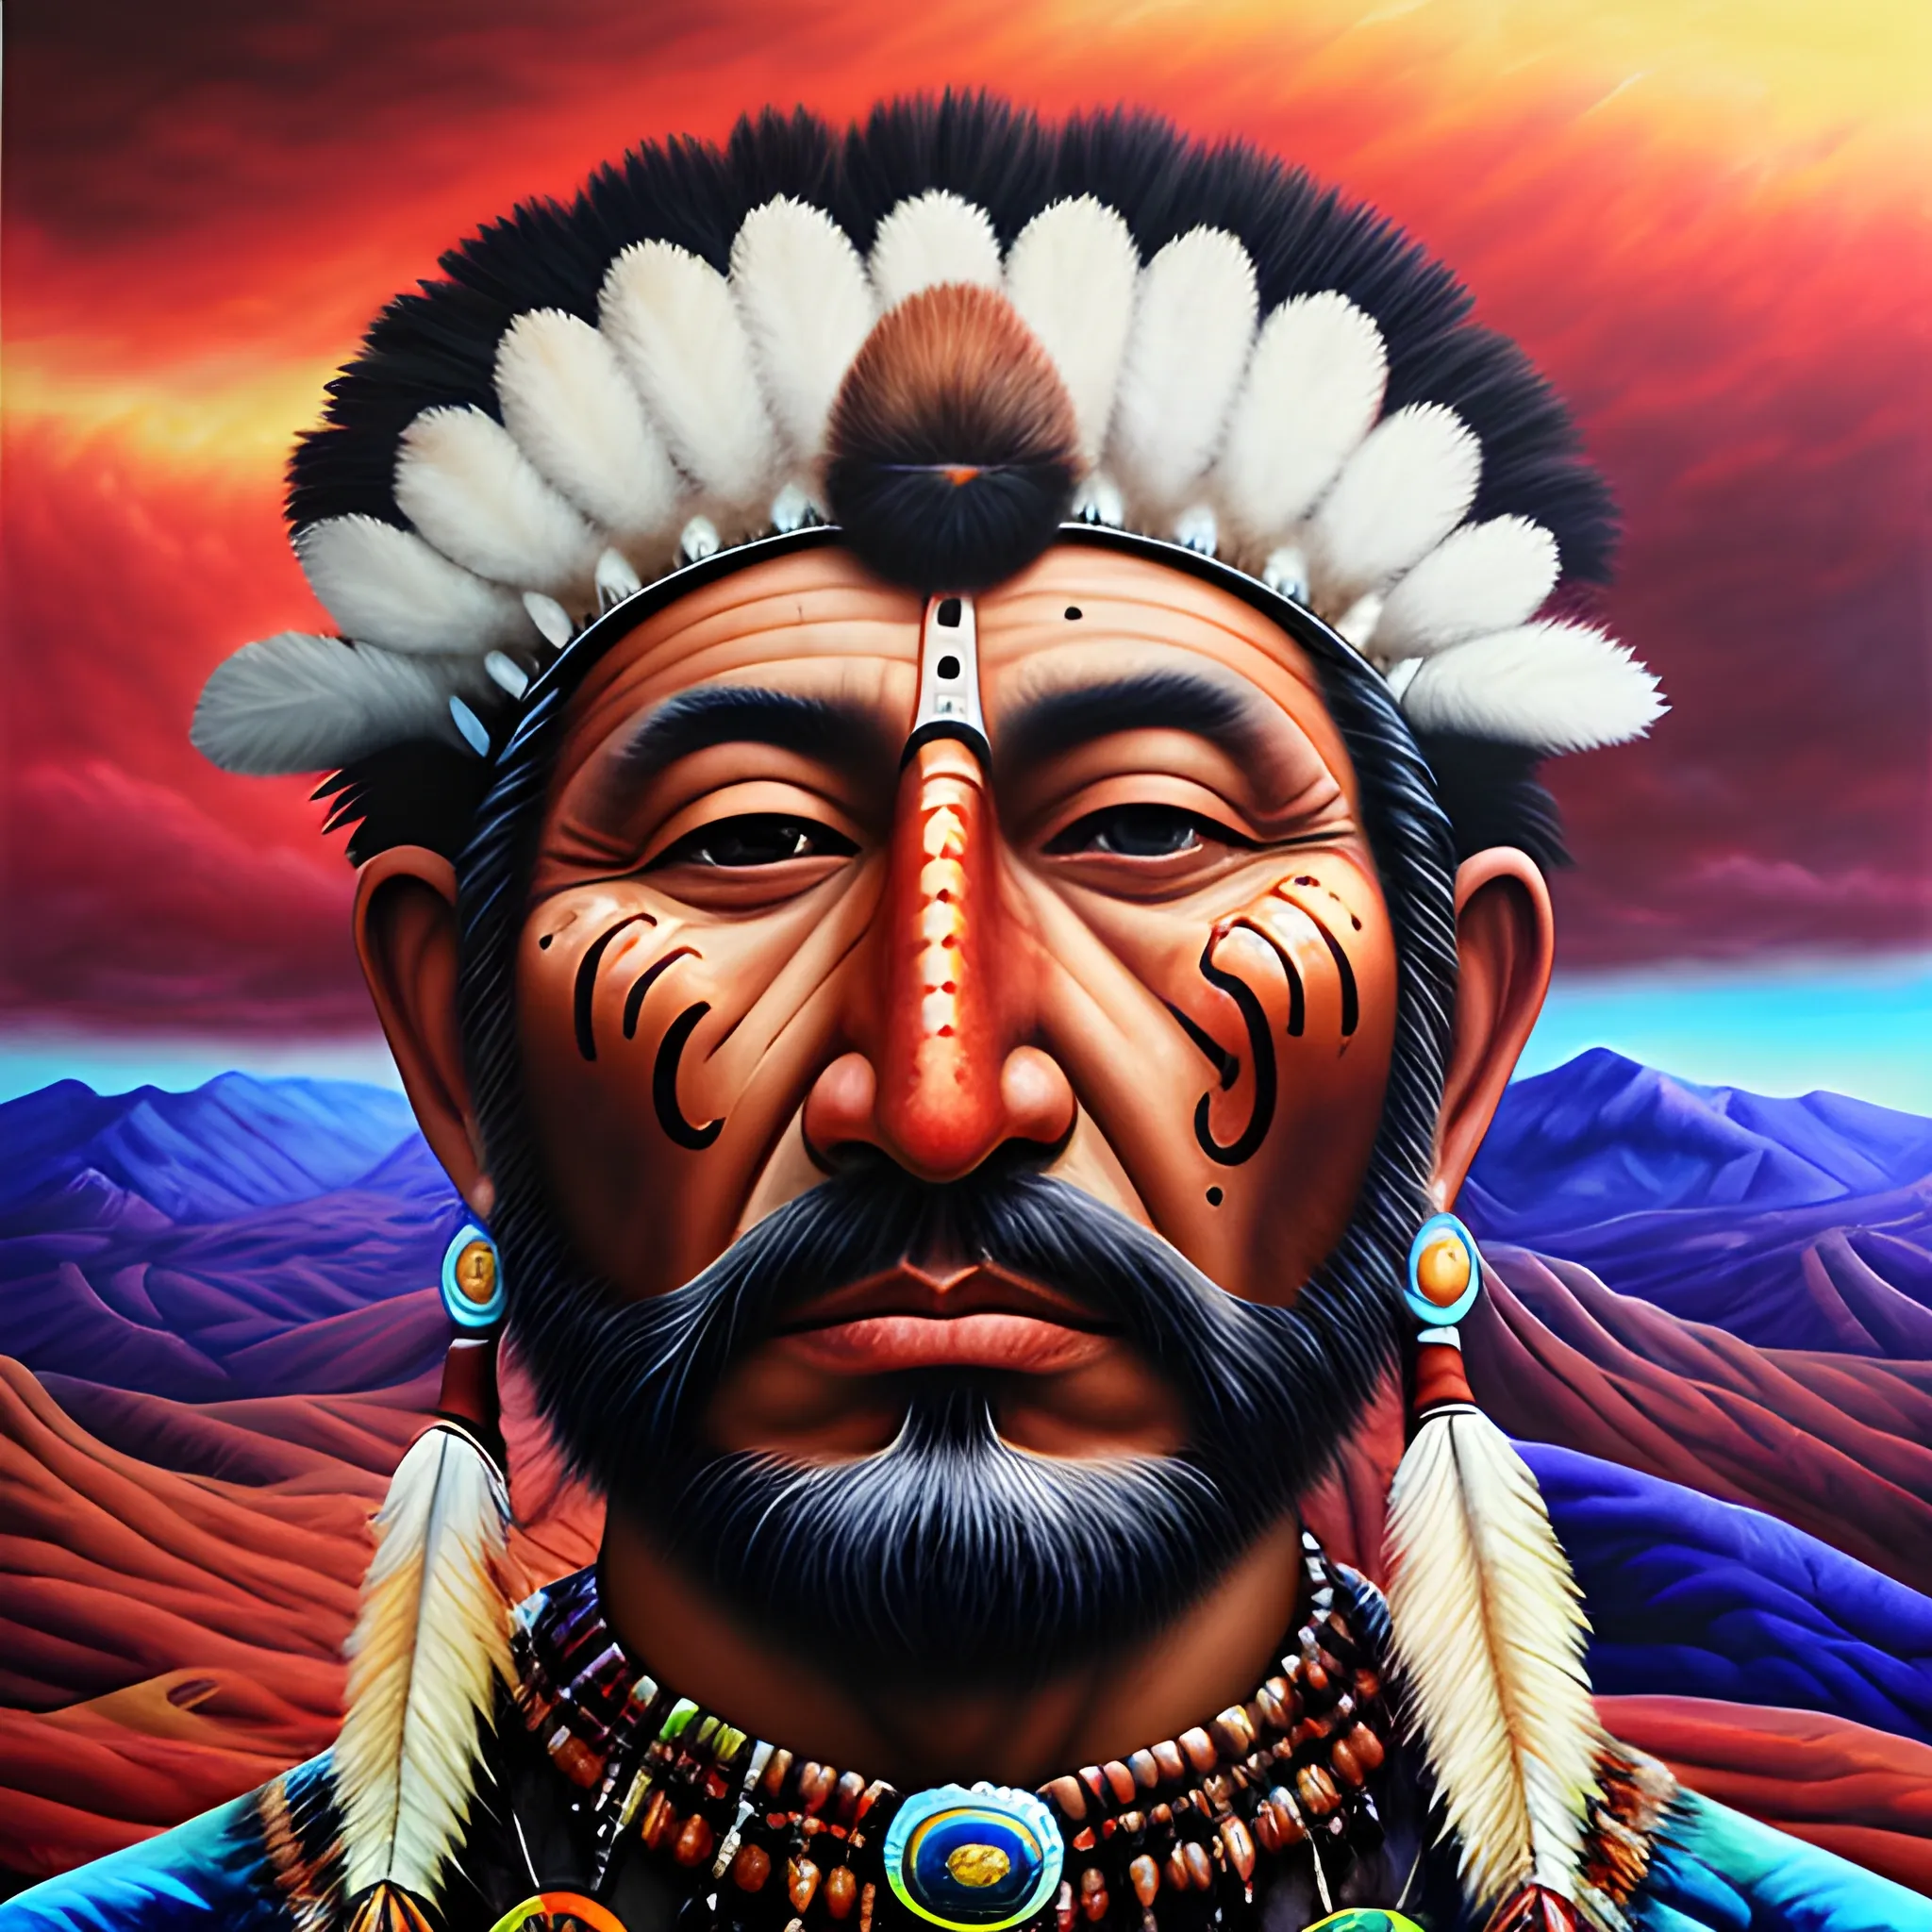 skin-face of chief-
man. mountin landscape,
athmospher, clouds, Trippy, , Oil Painting